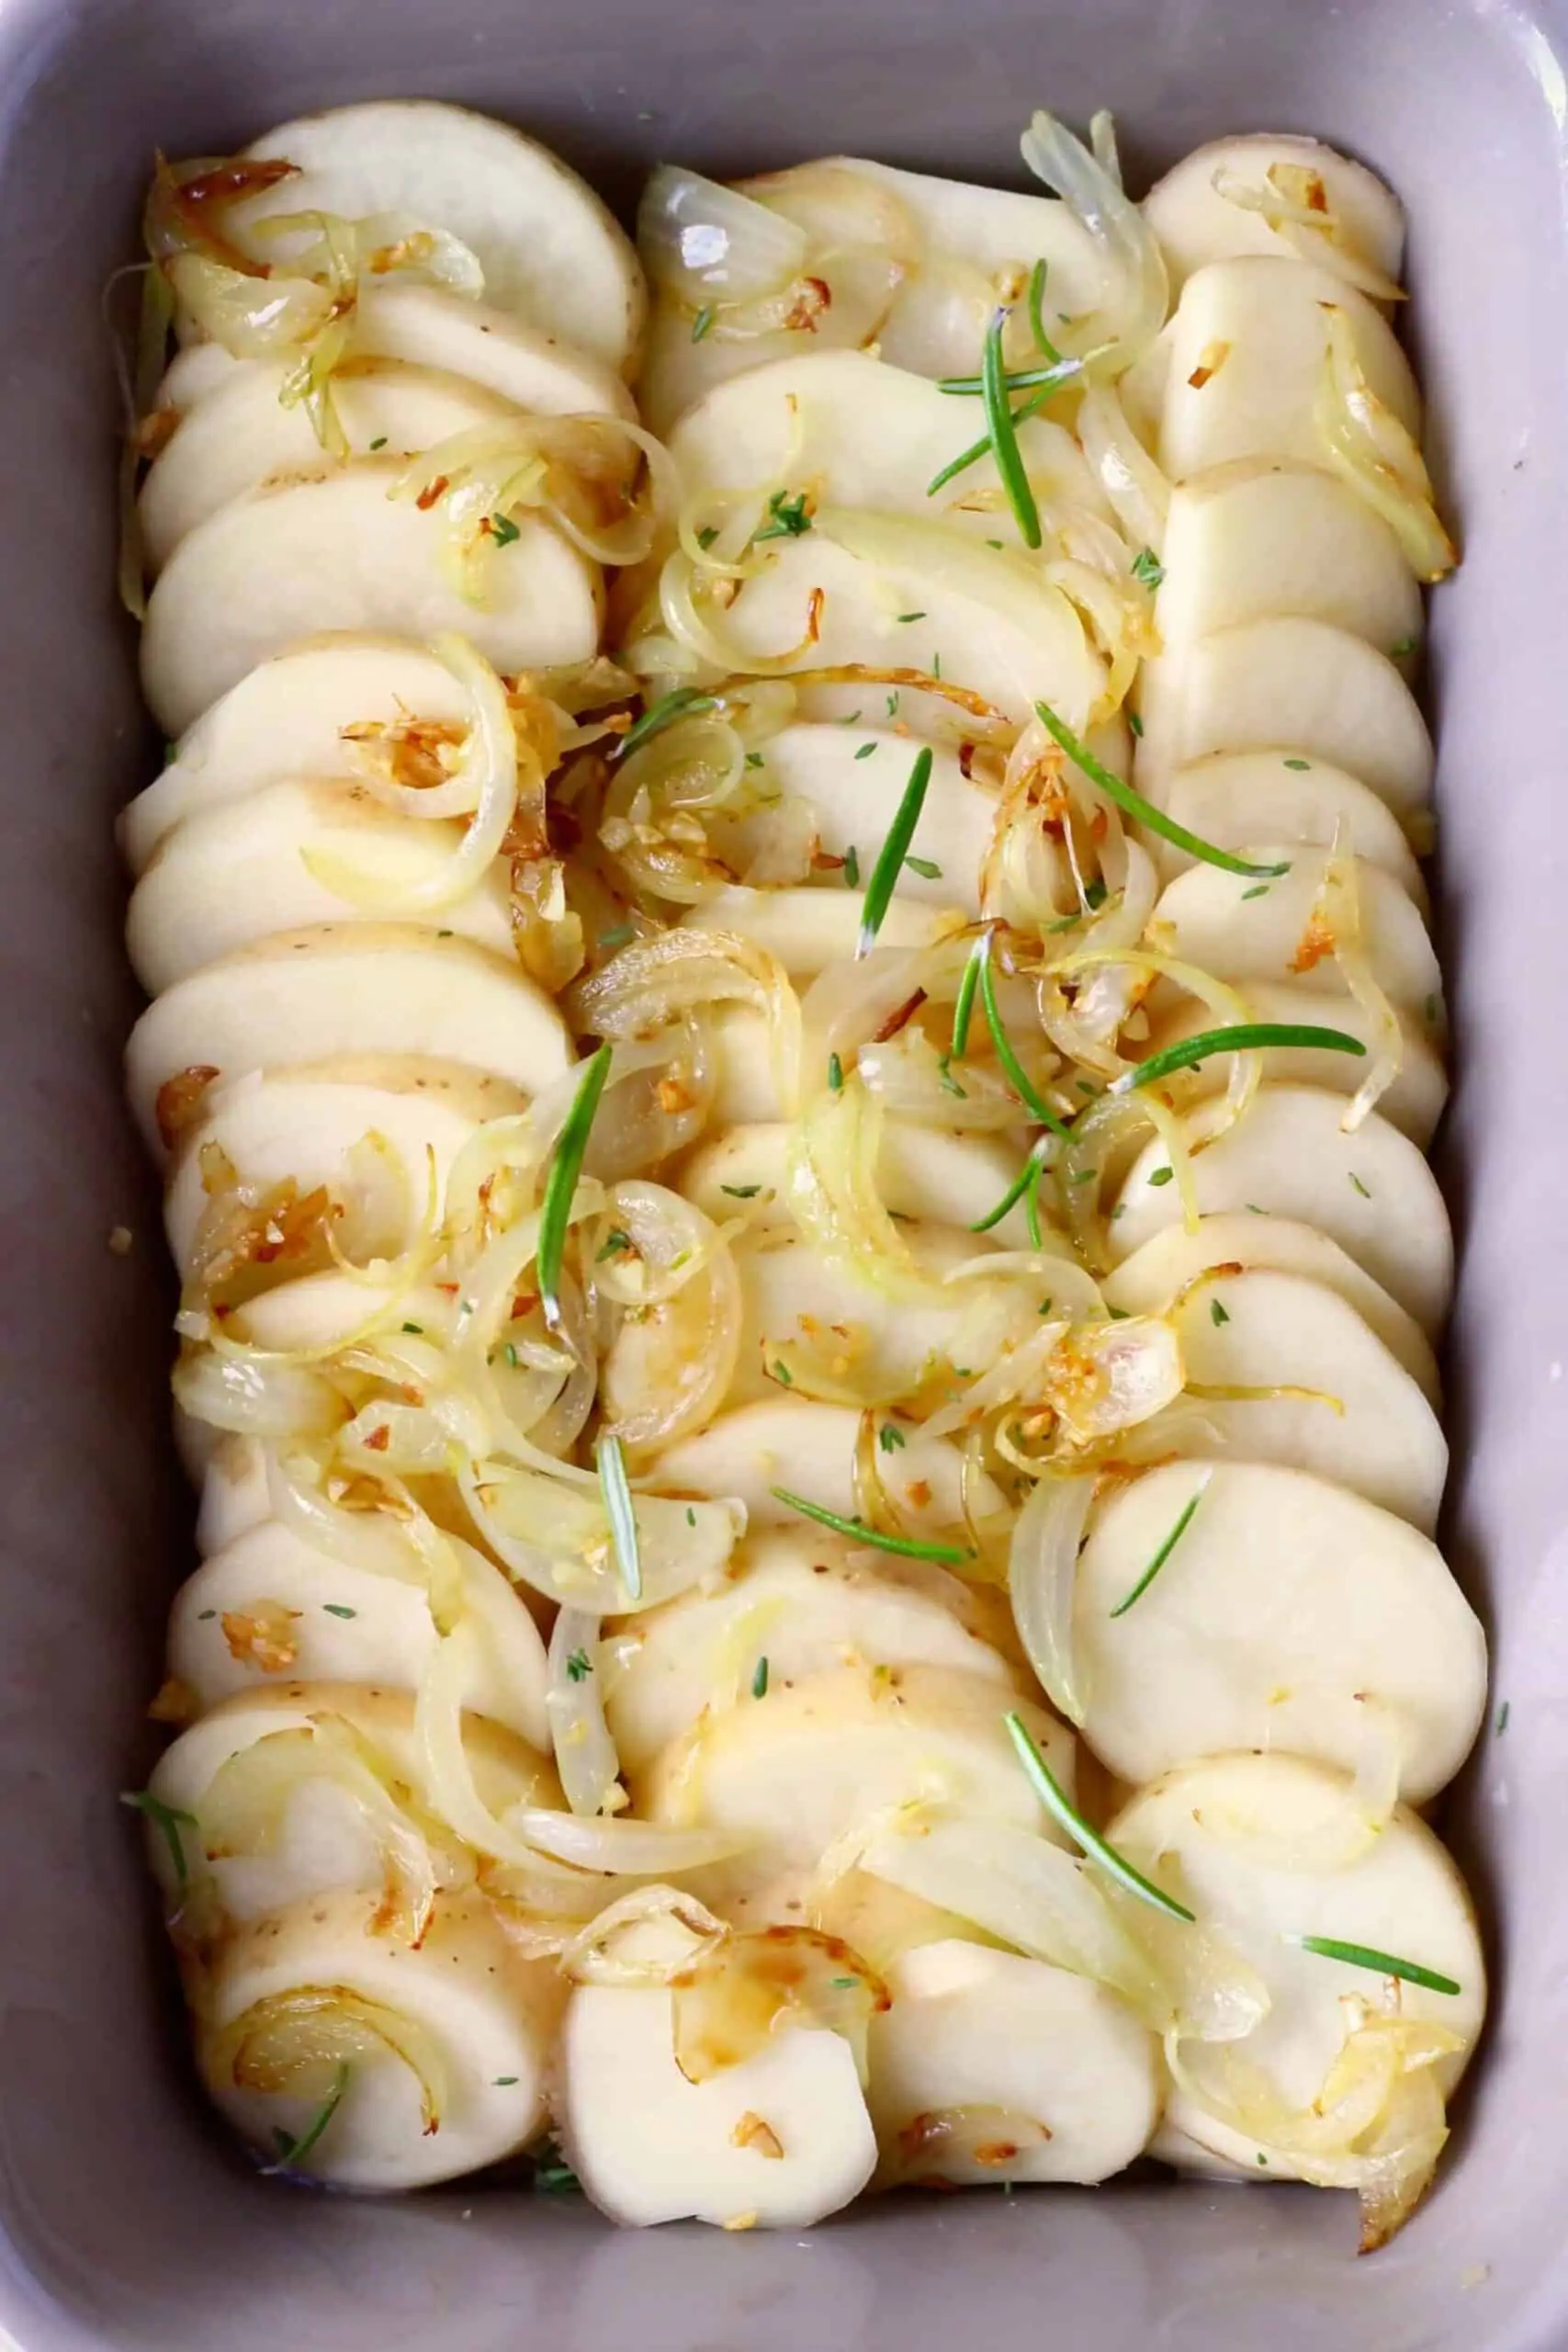 Sliced potatoes topped with fried onions and green herbs in a baking dish